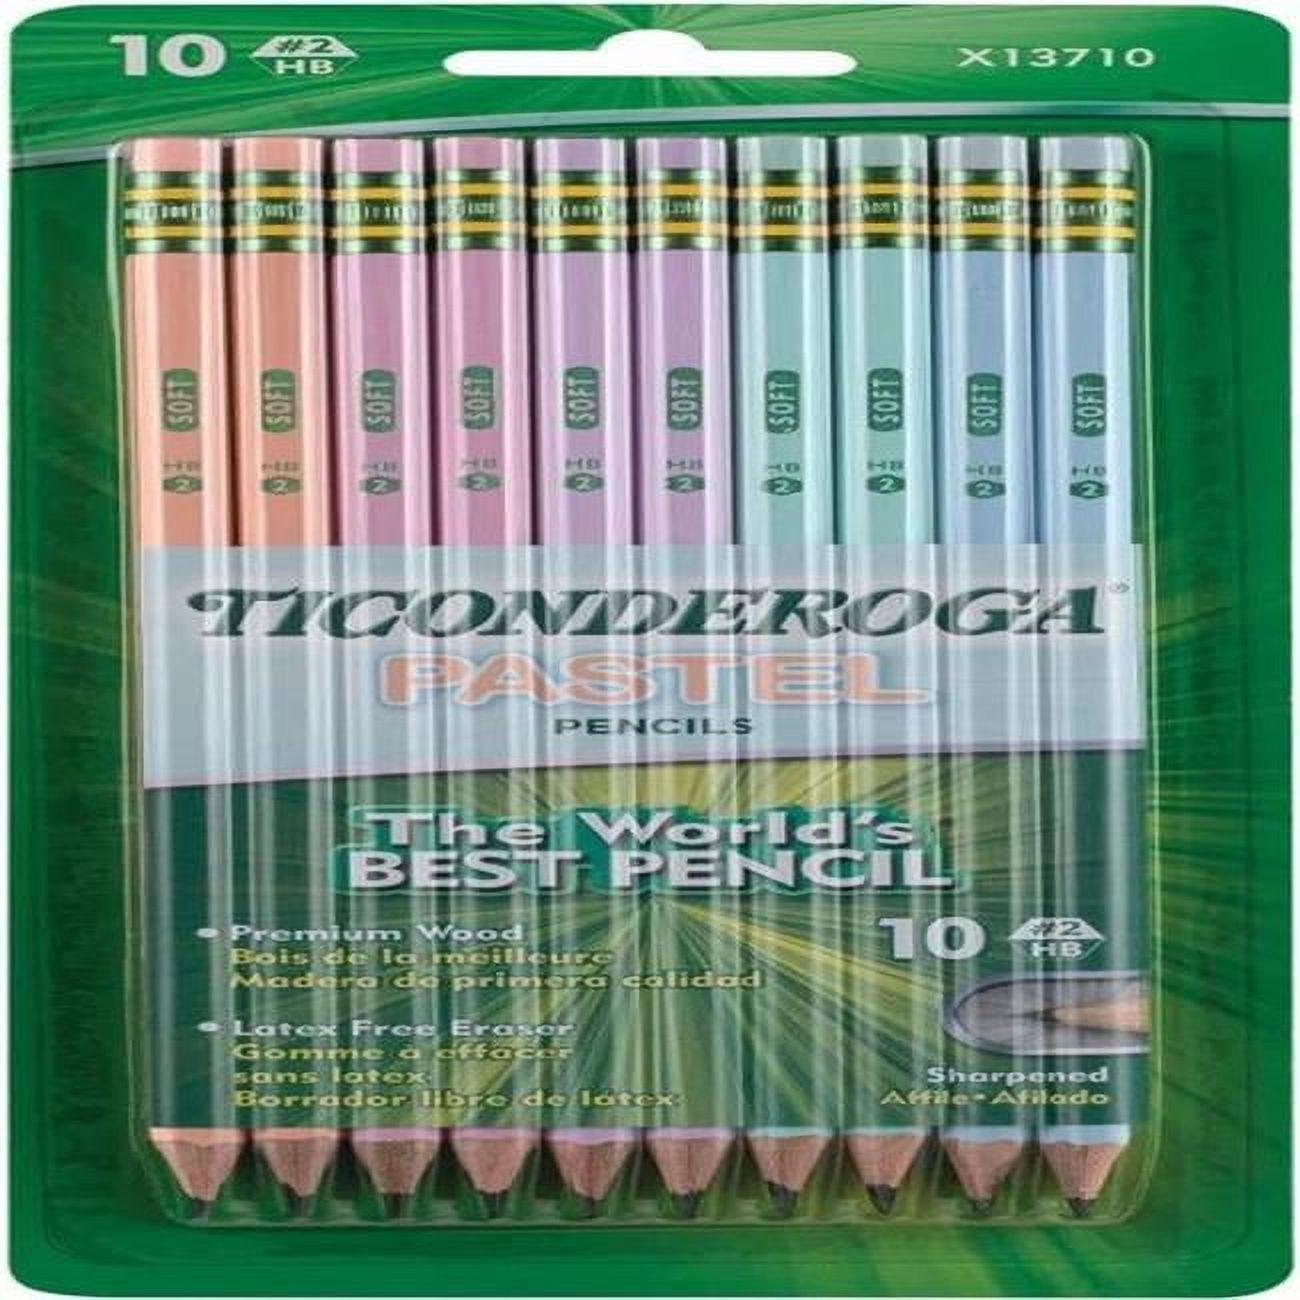  50 Pieces Half Pencils Baby Shower Pencils Sharpened Pencils  with Erasers Pencils for Baby Shower Presharpened Pencils Woodcase Pencils  for School Office Supplies, 4 Inch (Wood Color, Simple Style) : Office  Products